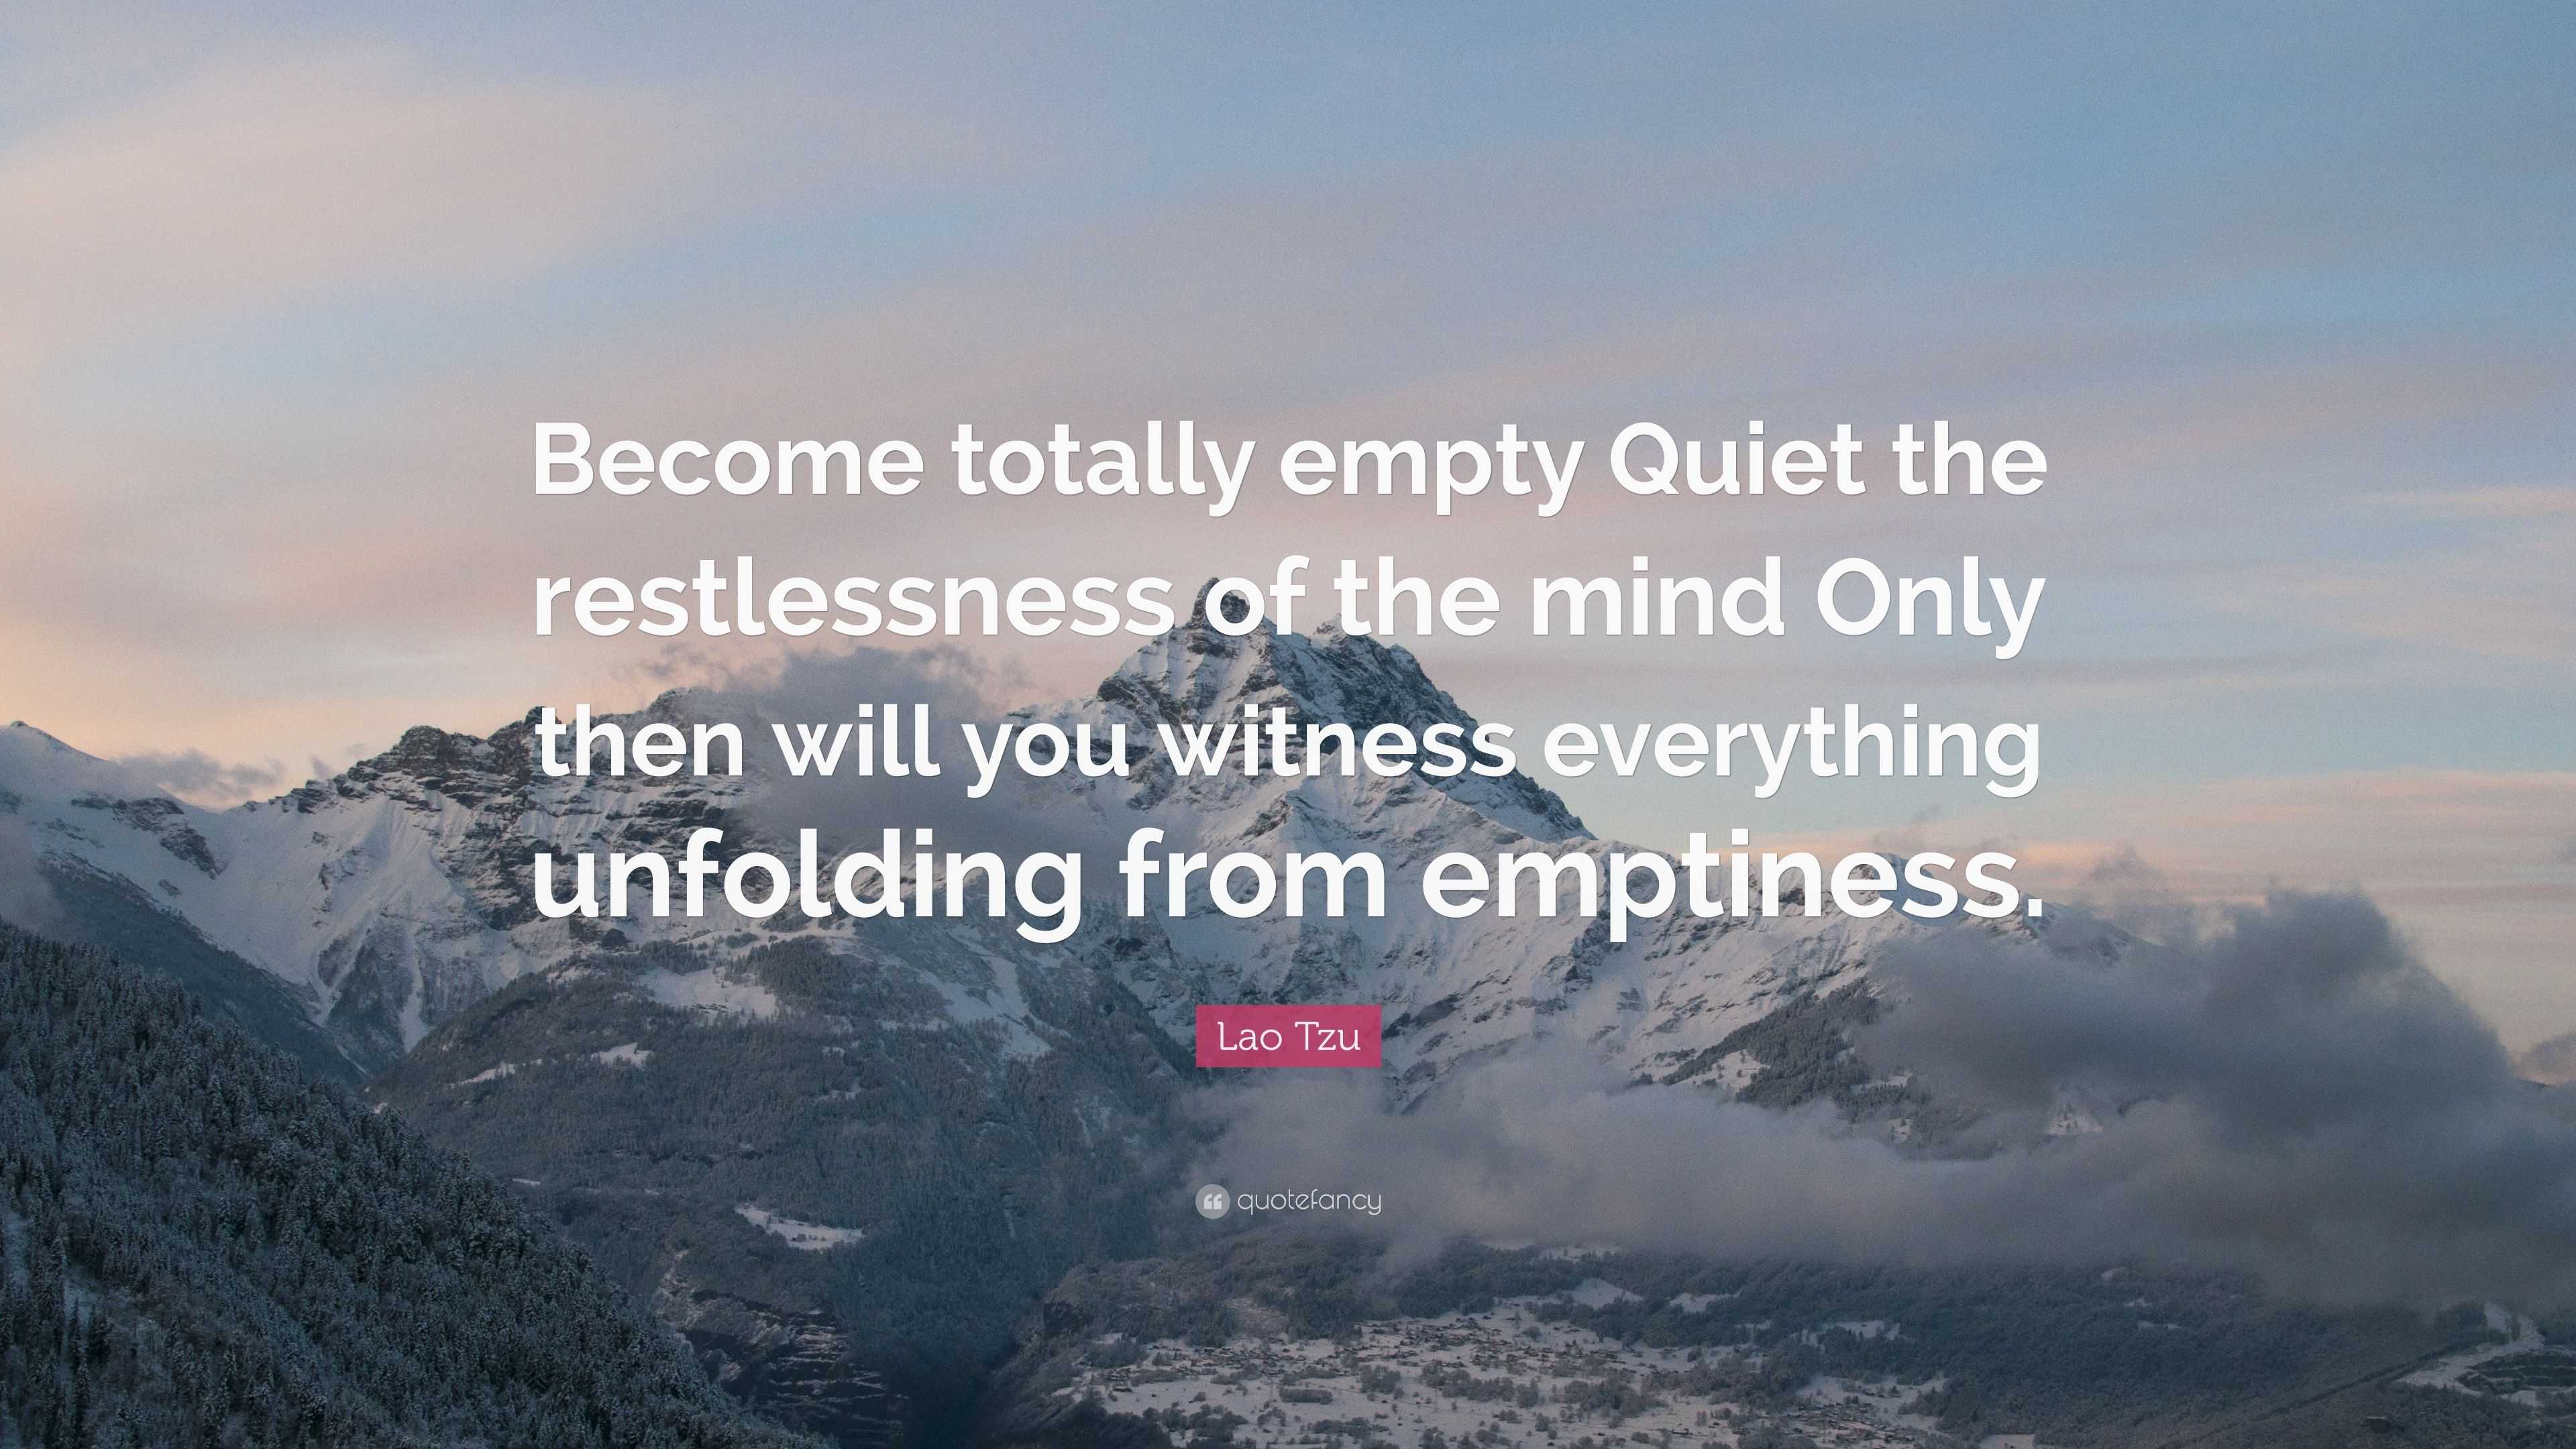 Lao Tzu Quote: “Become totally empty Quiet the restlessness of the mind ...